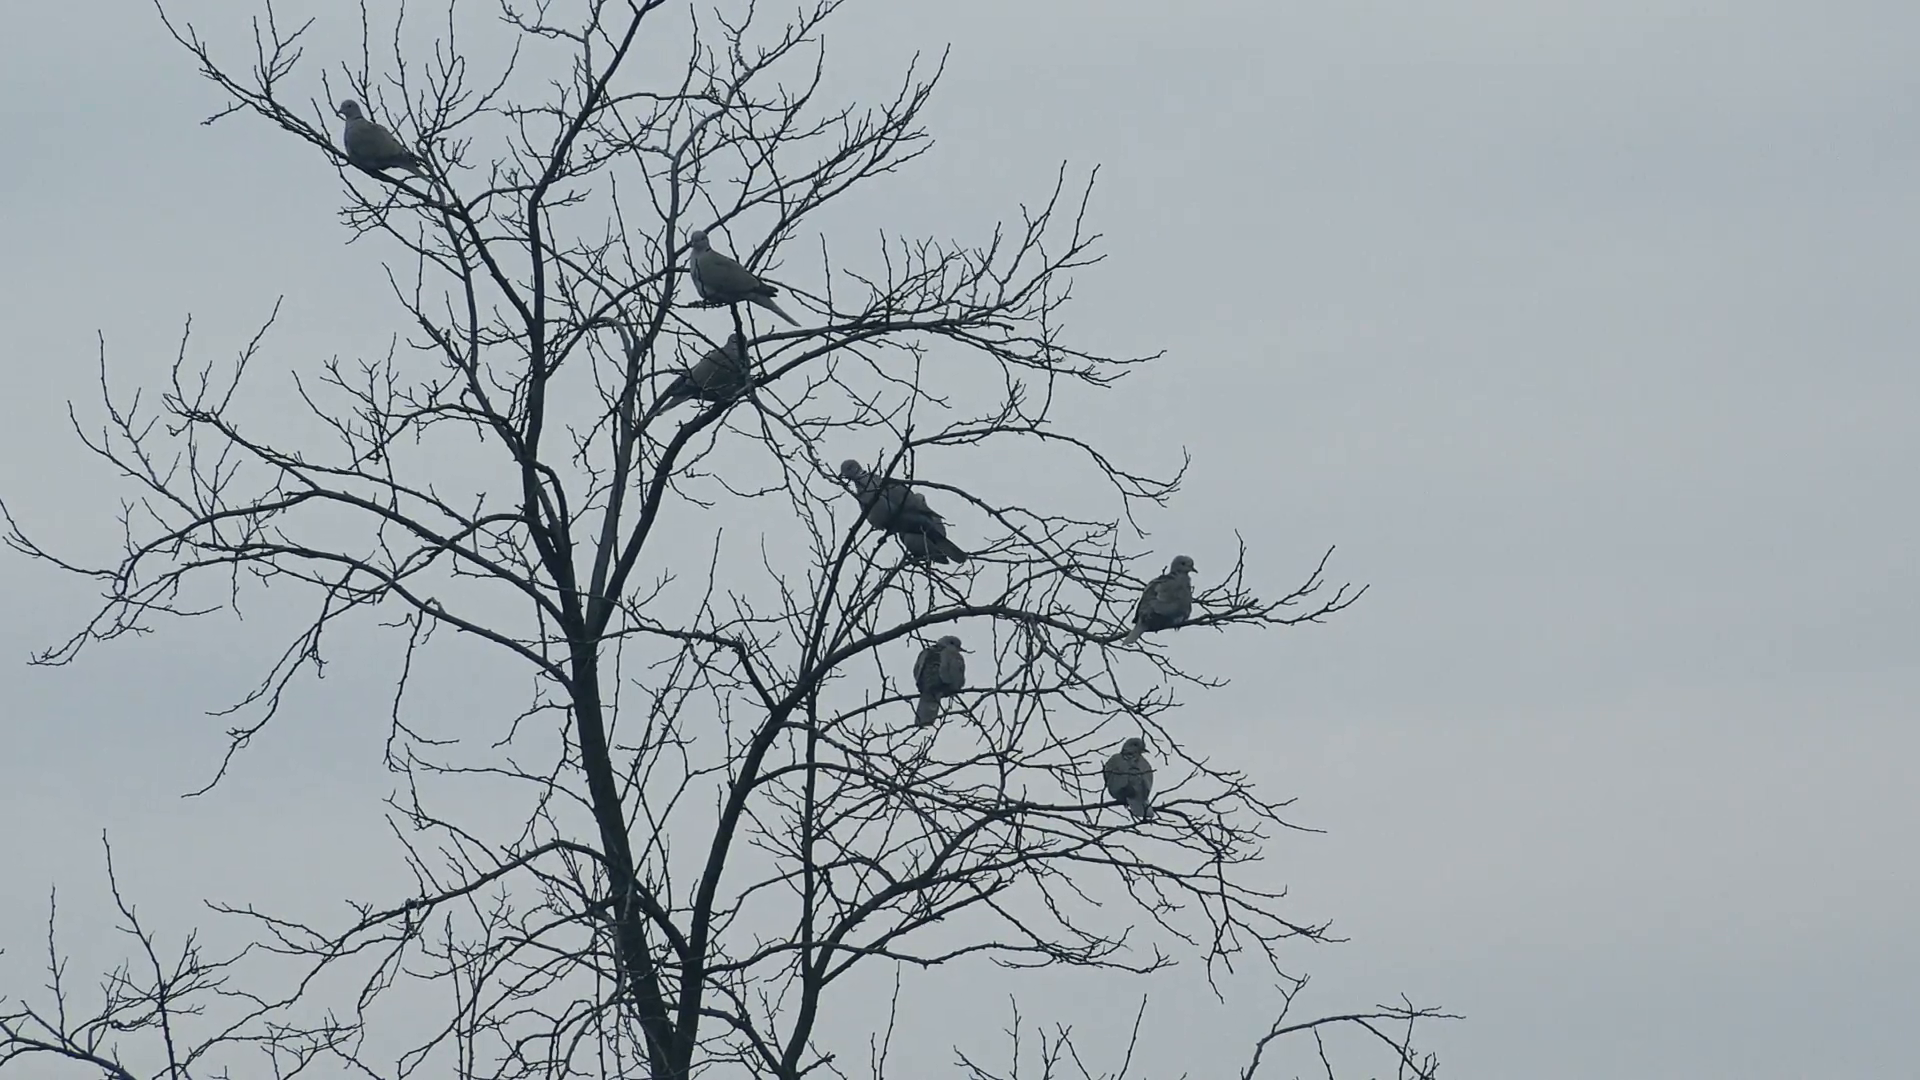 Flock of birds resting on bare treetop in winter, pigeons and doves ...